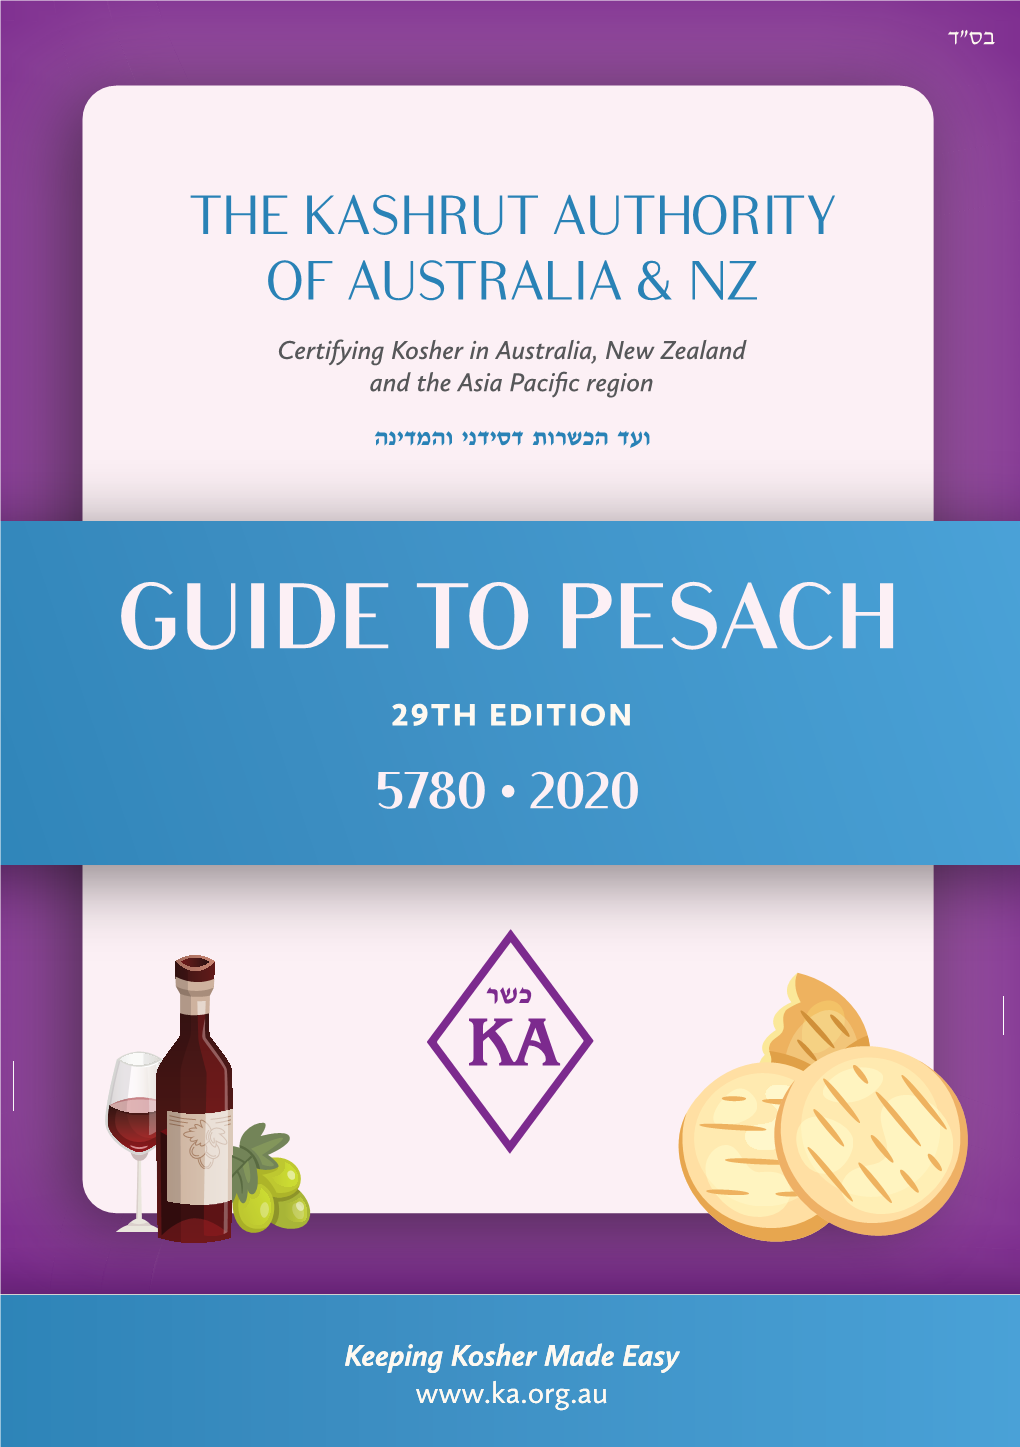 Guide to Pesach Th Edition 5780 • 2020